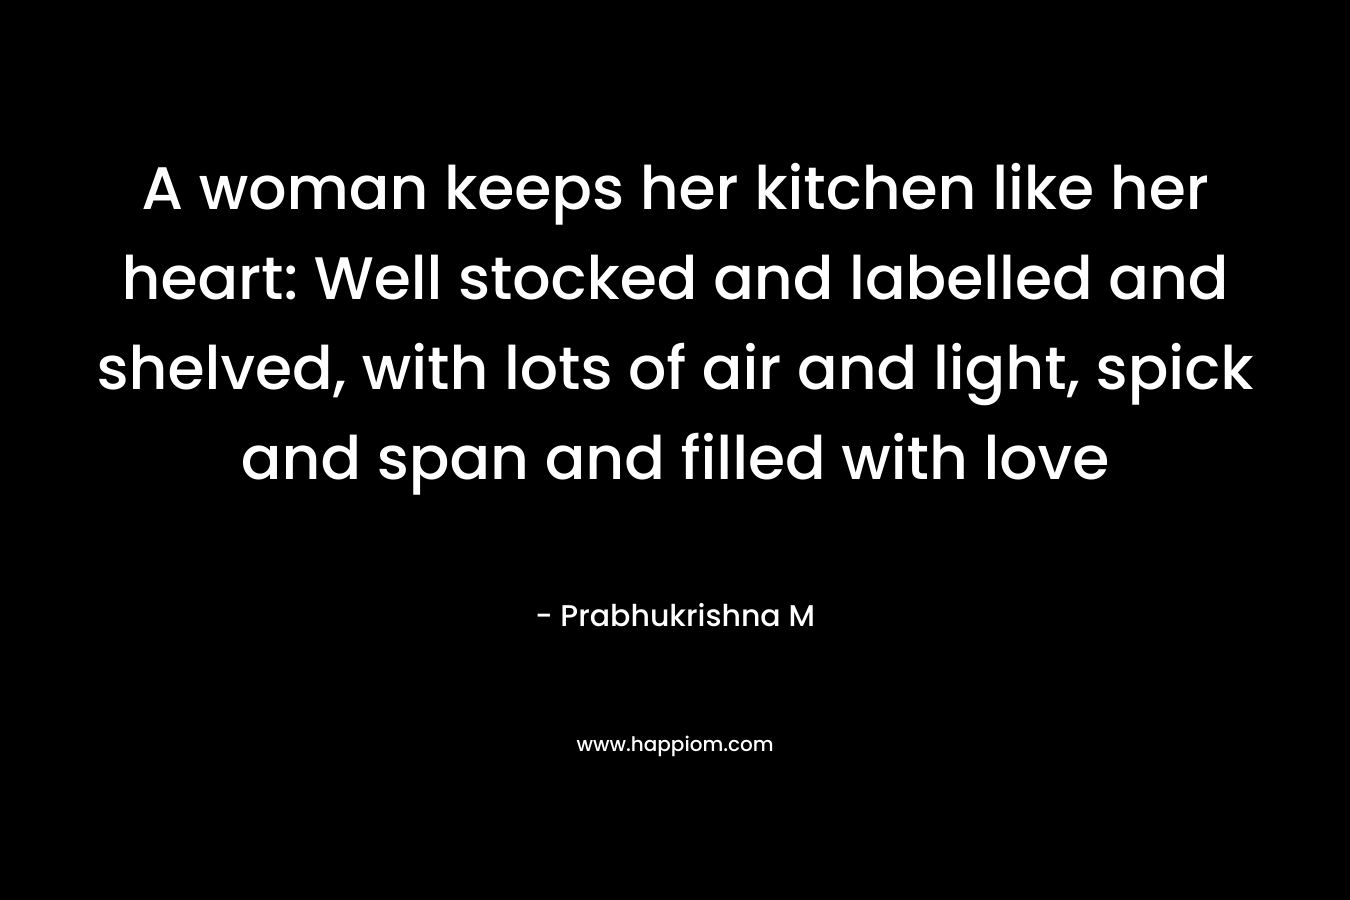 A woman keeps her kitchen like her heart: Well stocked and labelled and shelved, with lots of air and light, spick and span and filled with love